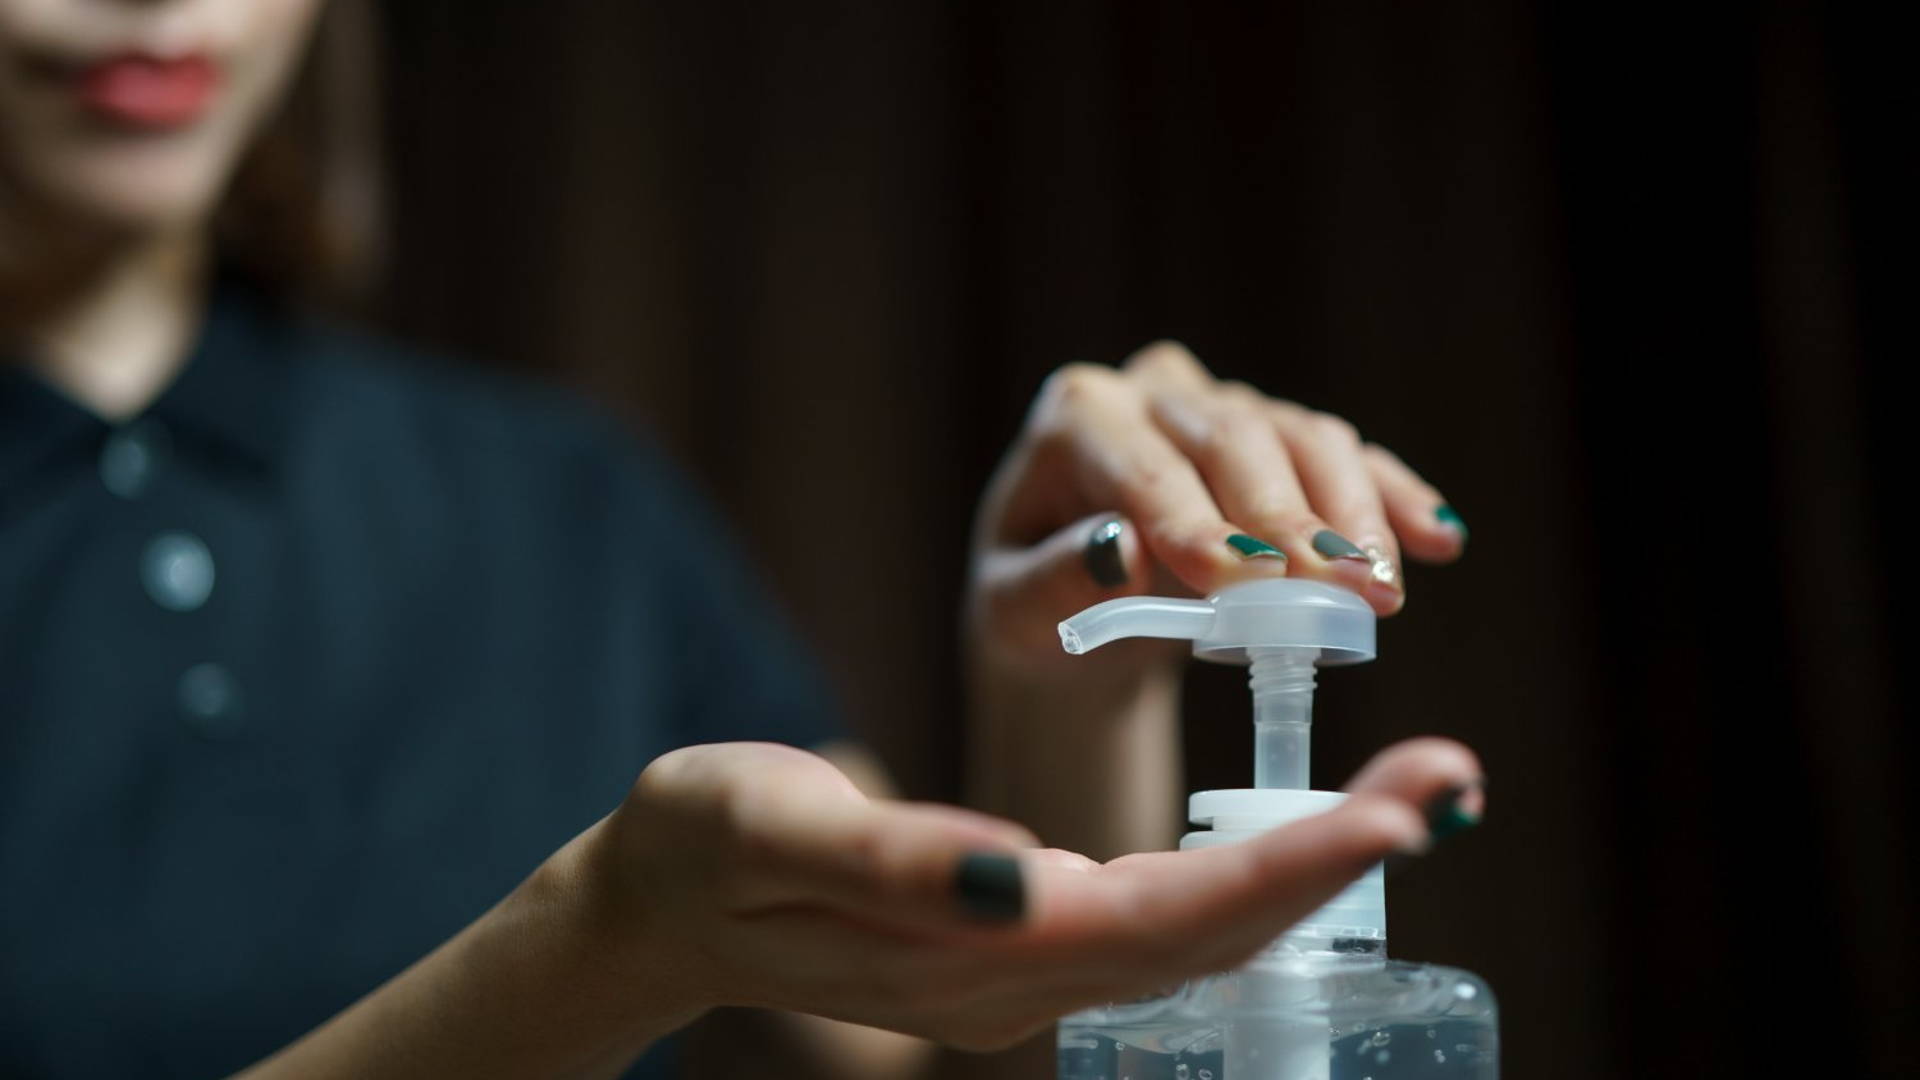 Perfume and Alcohol Makers Are Now Making Hand Sanitizer | Dieline